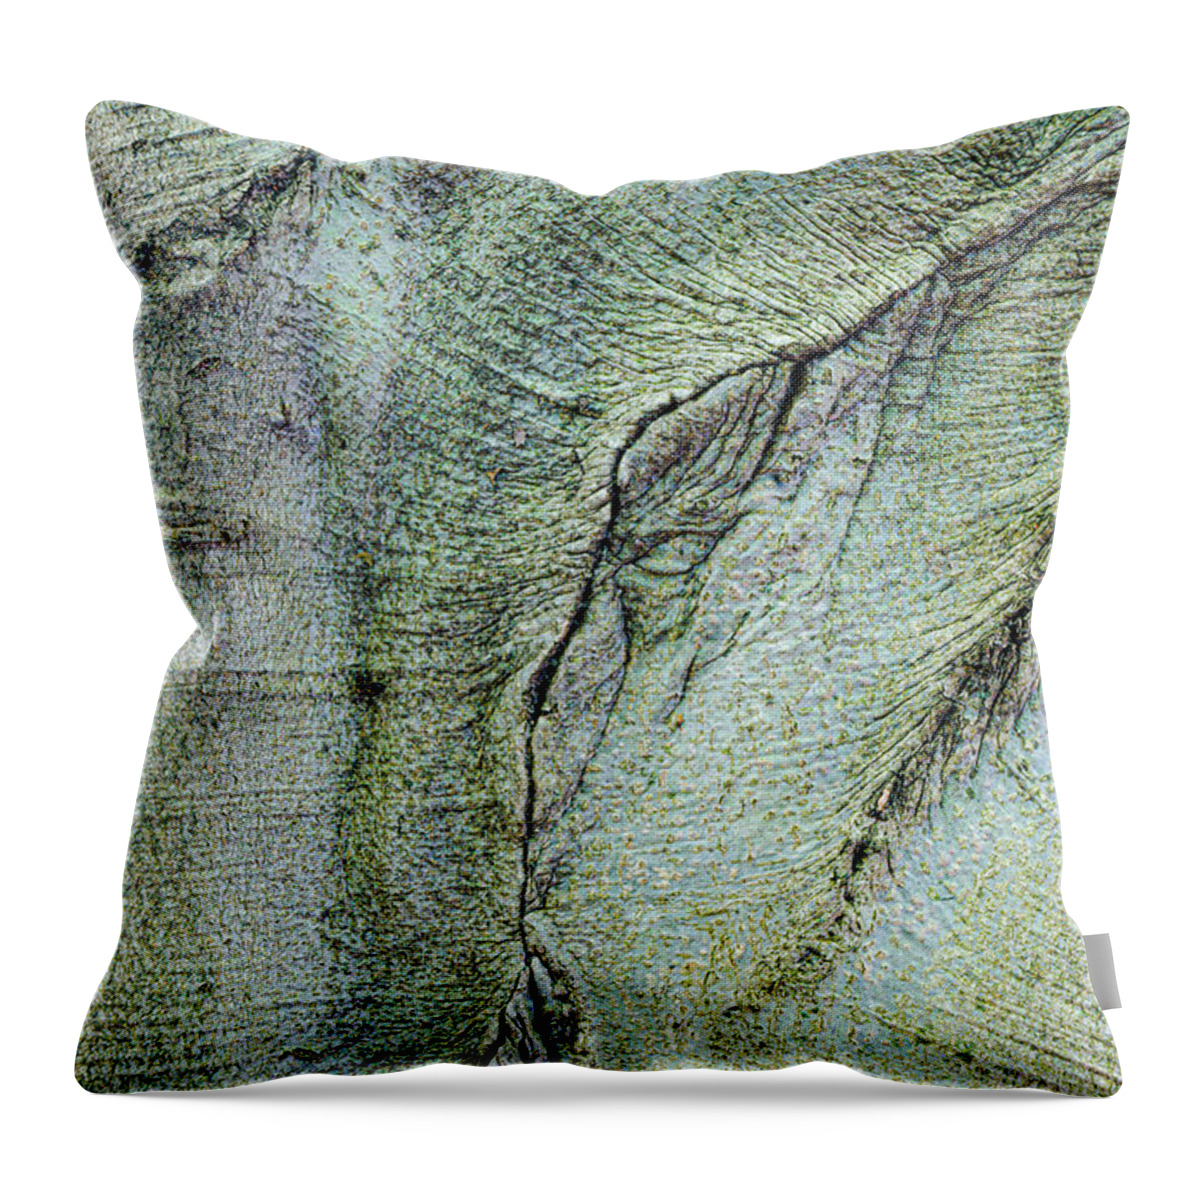 Tree Throw Pillow featuring the photograph Abstract In The Tree Bark by Gary Slawsky